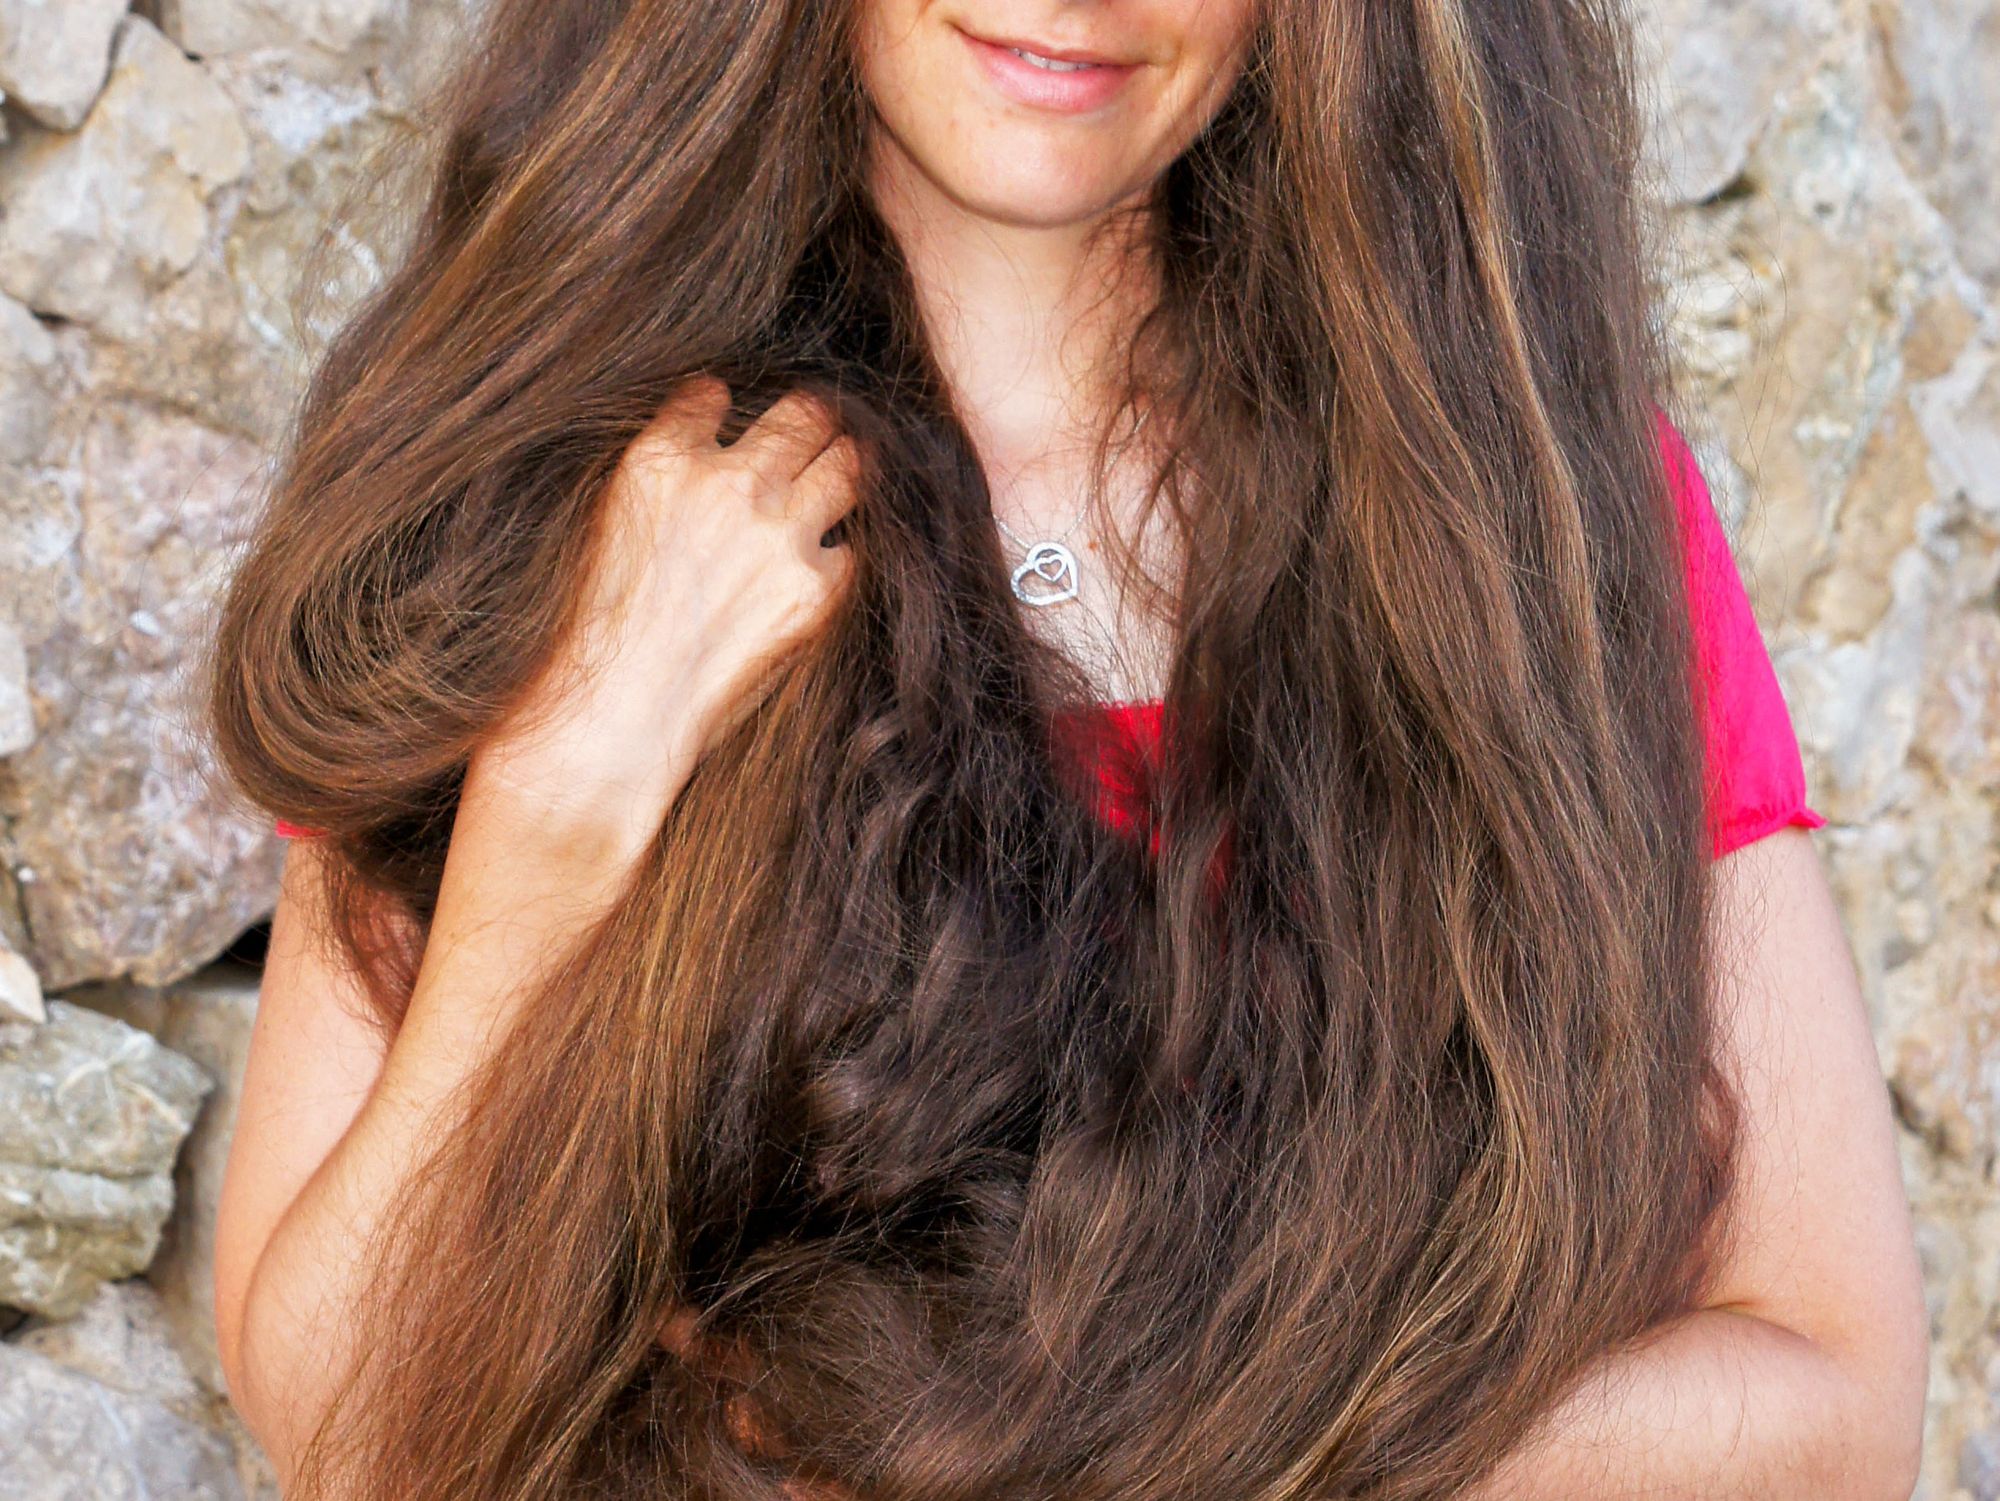 People With Really Long Hair Explain Their Daily Struggles